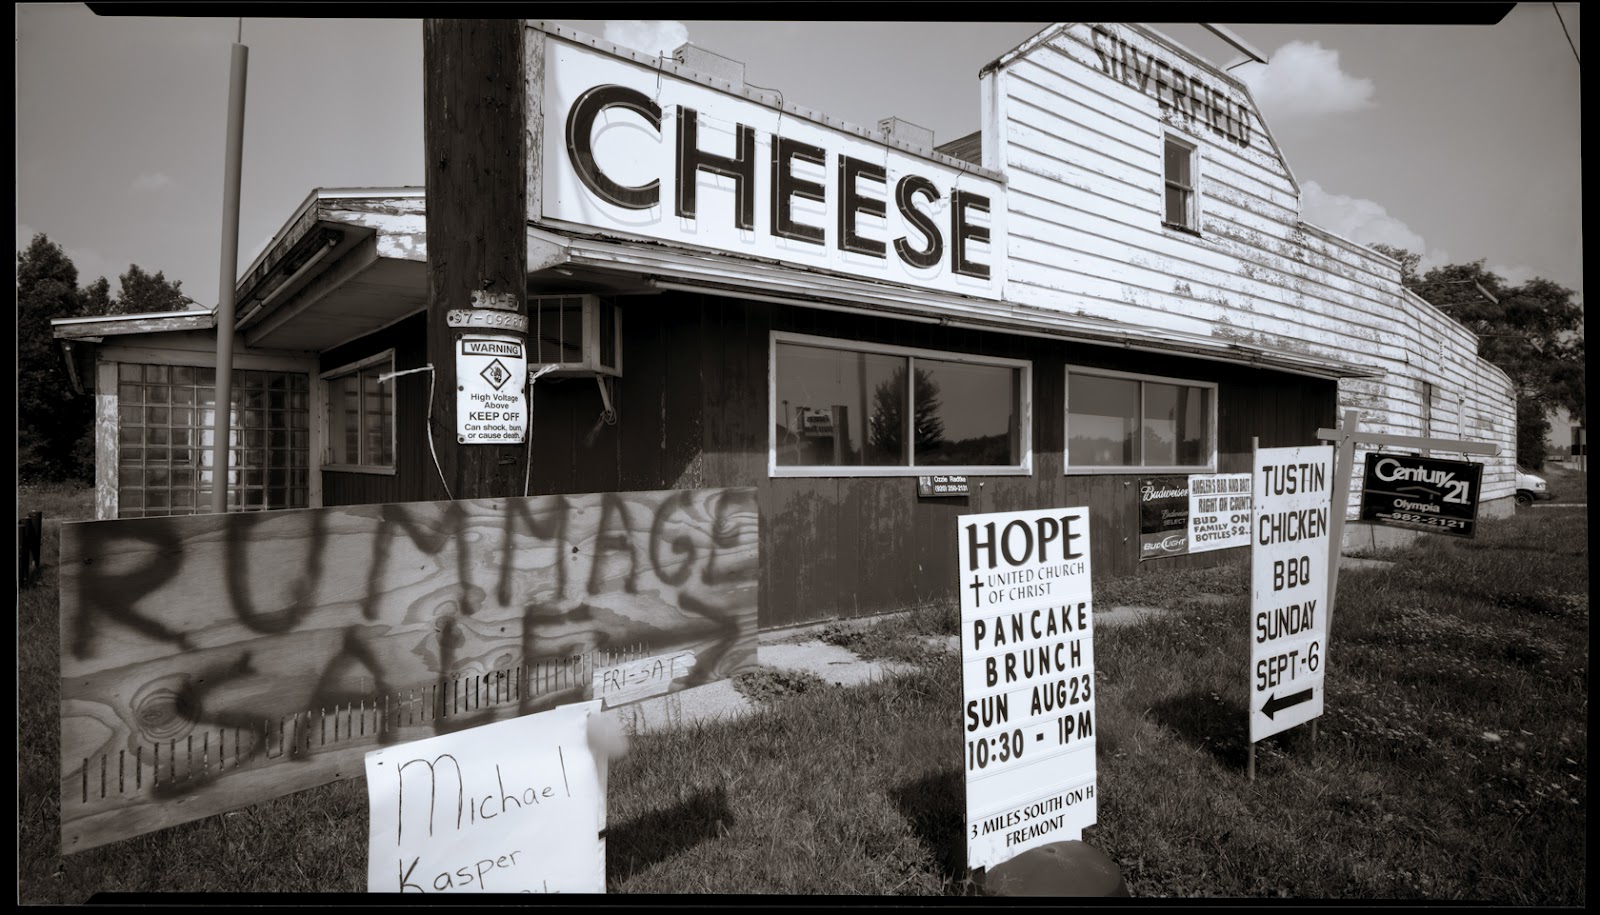 ﻿Silverfield Cheese Factory, Fremont, WI, ﻿2009